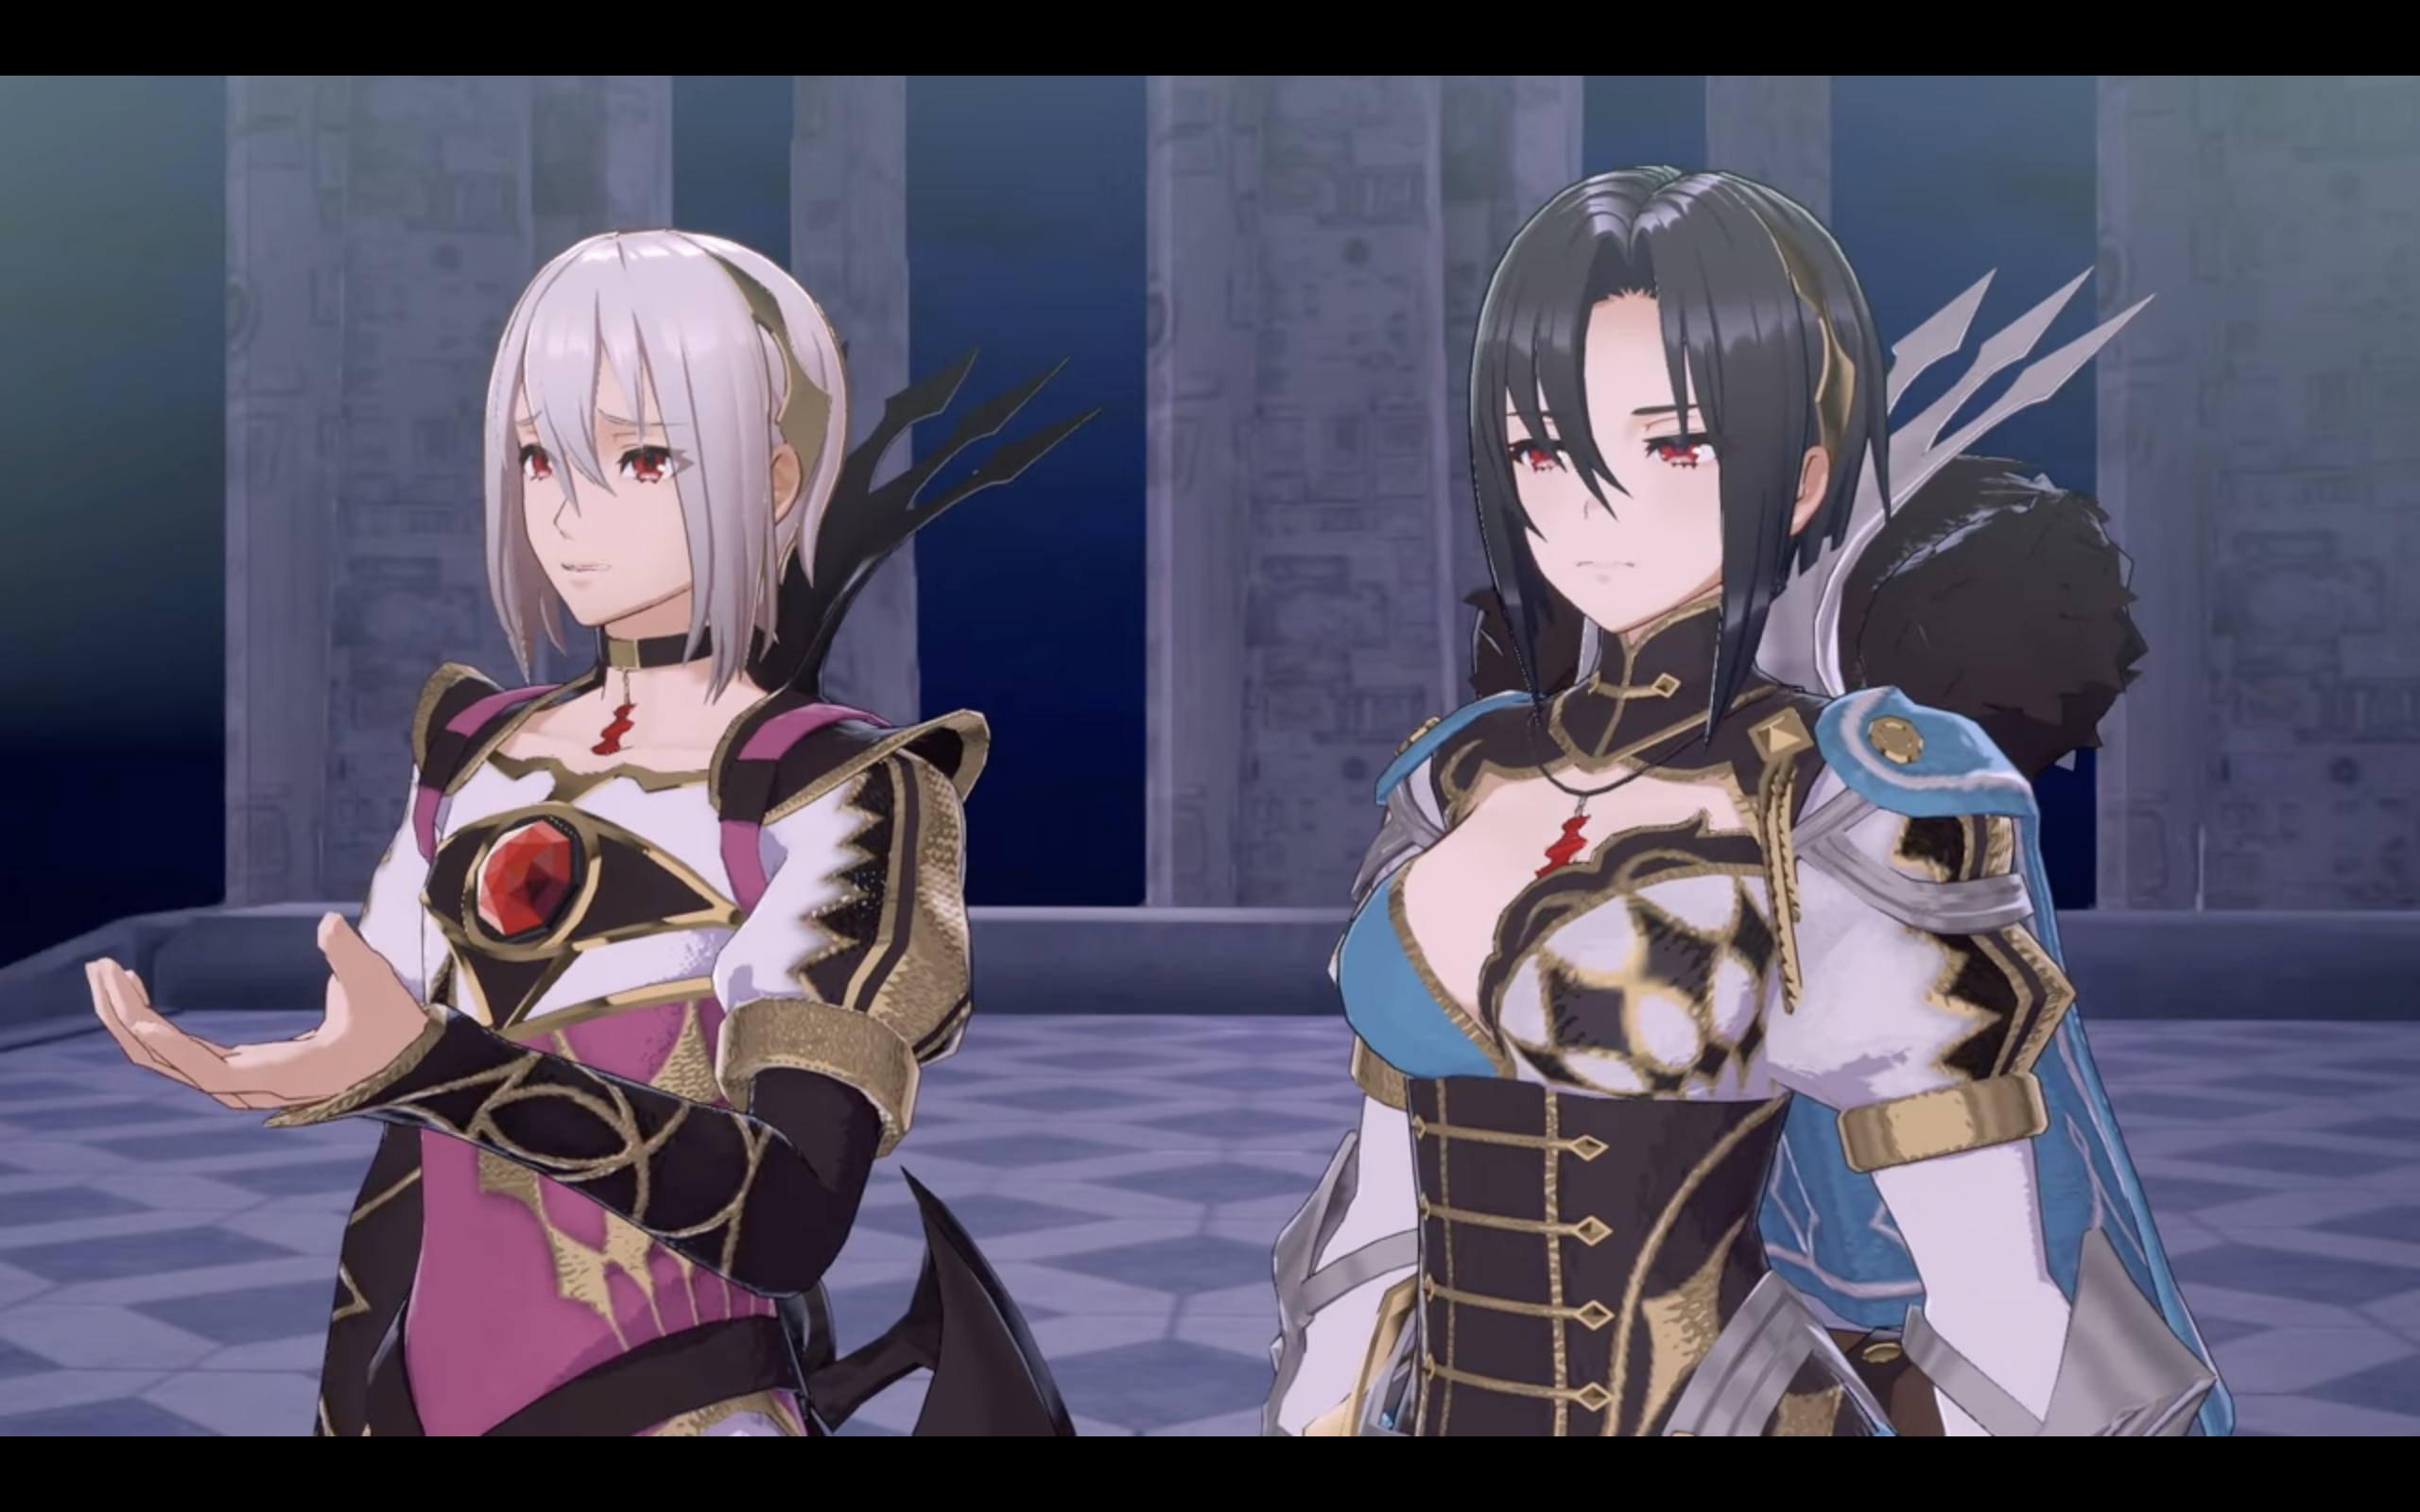 Fire Emblem Engage Fell Xenologue Story DLC Launches in April